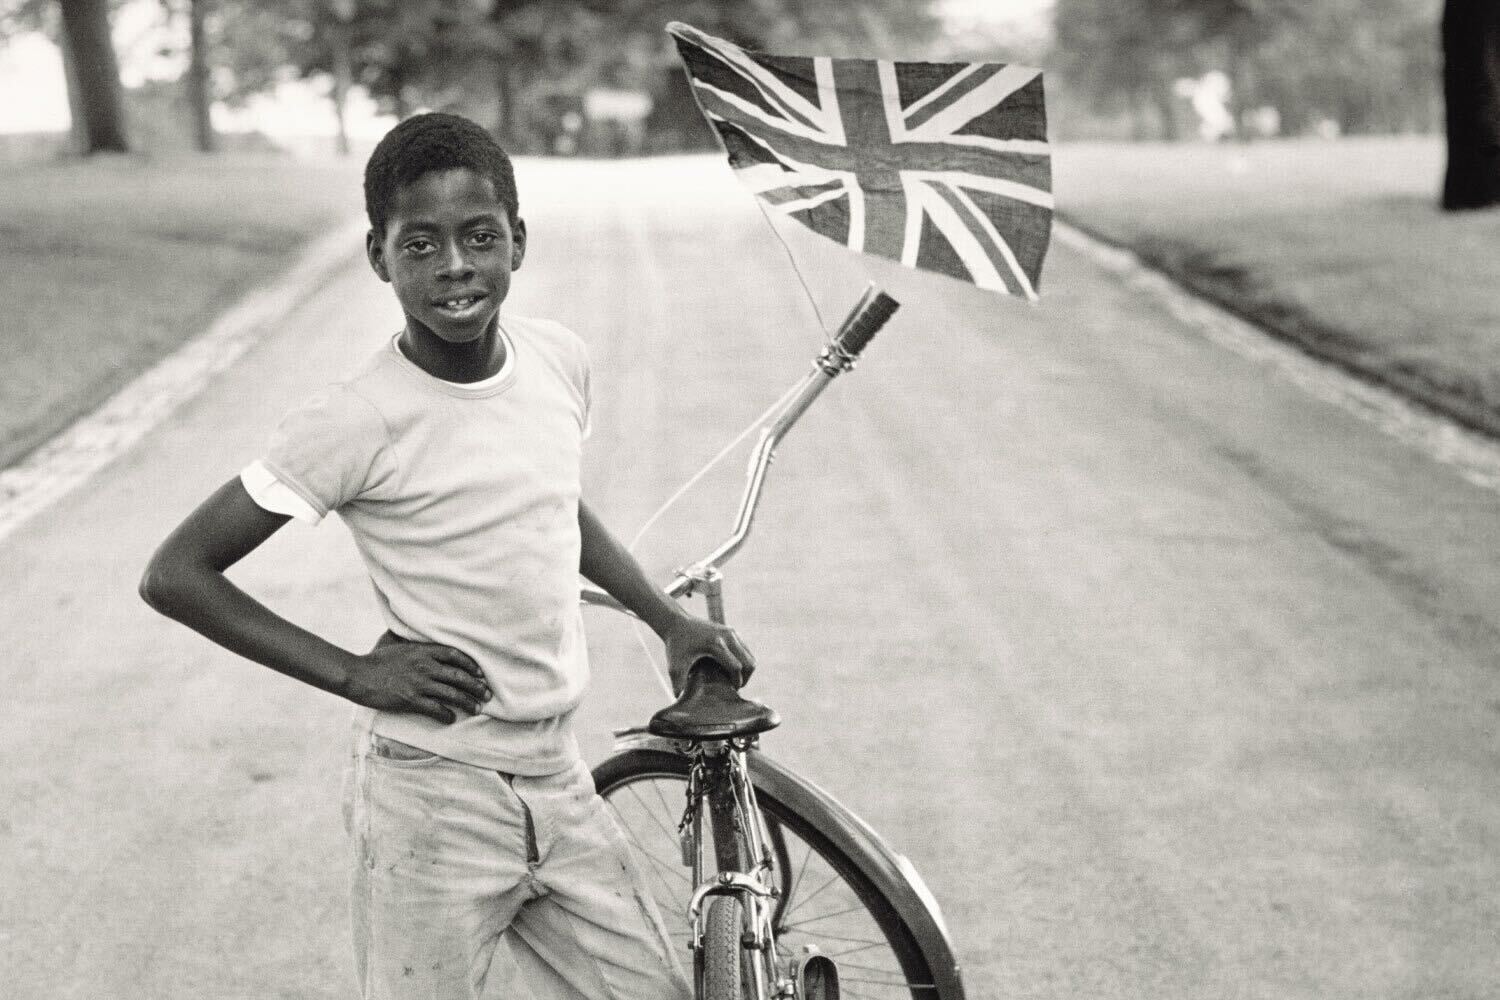 Boy with Flag, Winford in Handsworth Park , 1970, printed 2022 gelatin silver print National Gallery of Art, Washington, Alfred H. Moses and Fern M. Schad Fund